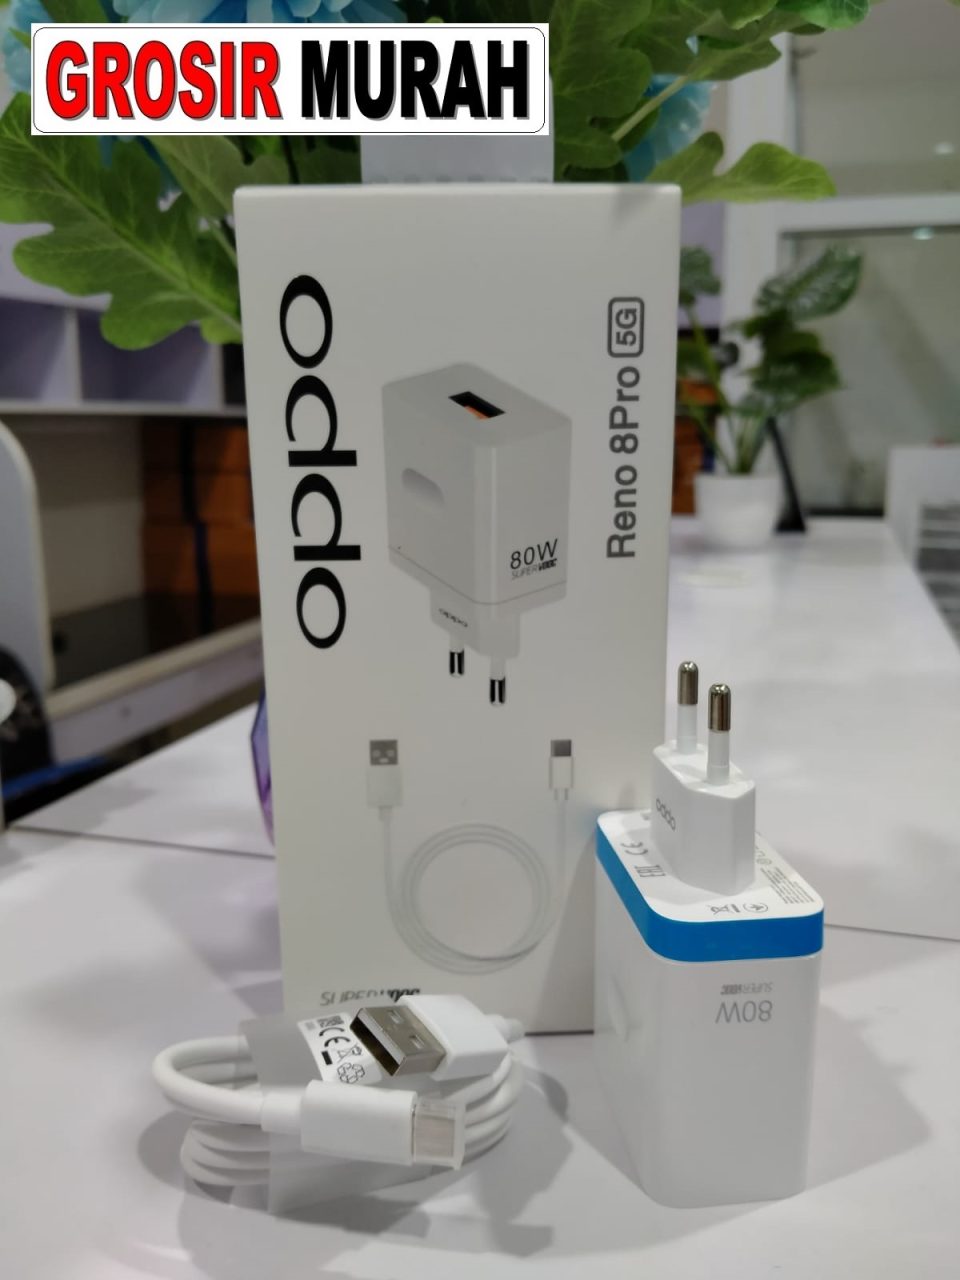 CHARGER OPPO TYPE C VC88JAEH 80W WHITE ORI 100% PACK SUPER VOOC Adaptor Charge Fast Charging Casan Spare Part Grosir Sparepart hp